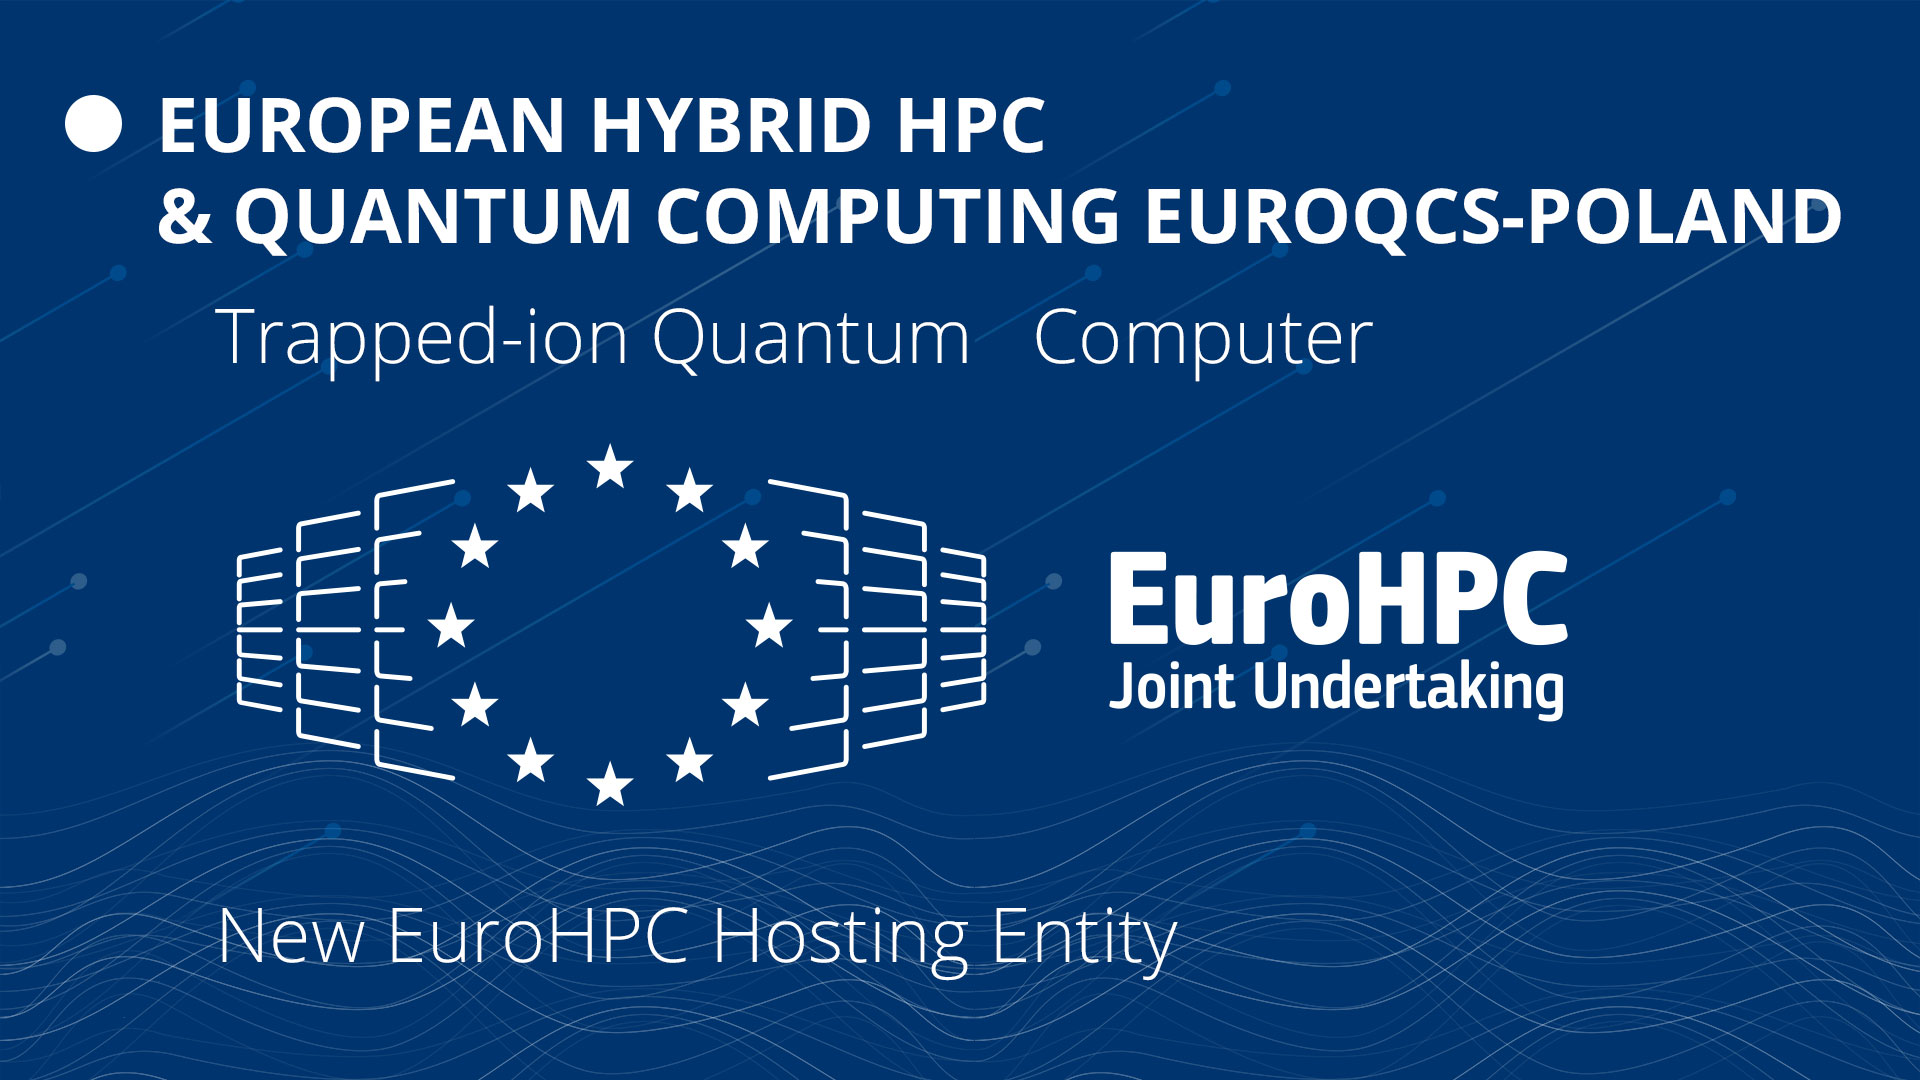 We will have #one of #six EuroHPC quantum computers located in Europe